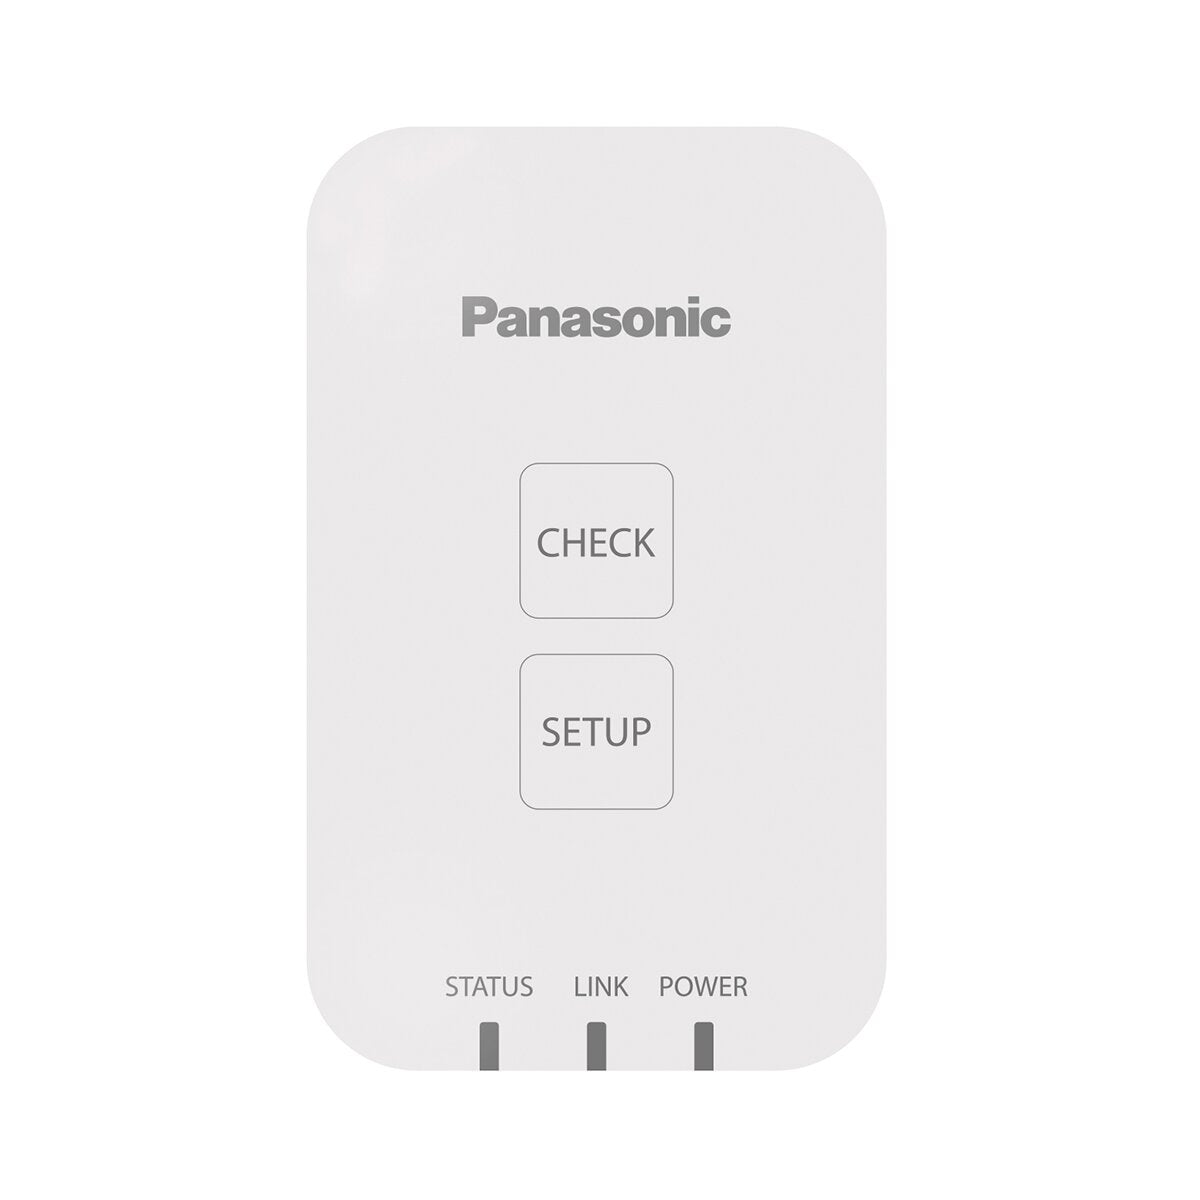 CZ-TACG1 WiFi control kit for Panasonic air conditioners